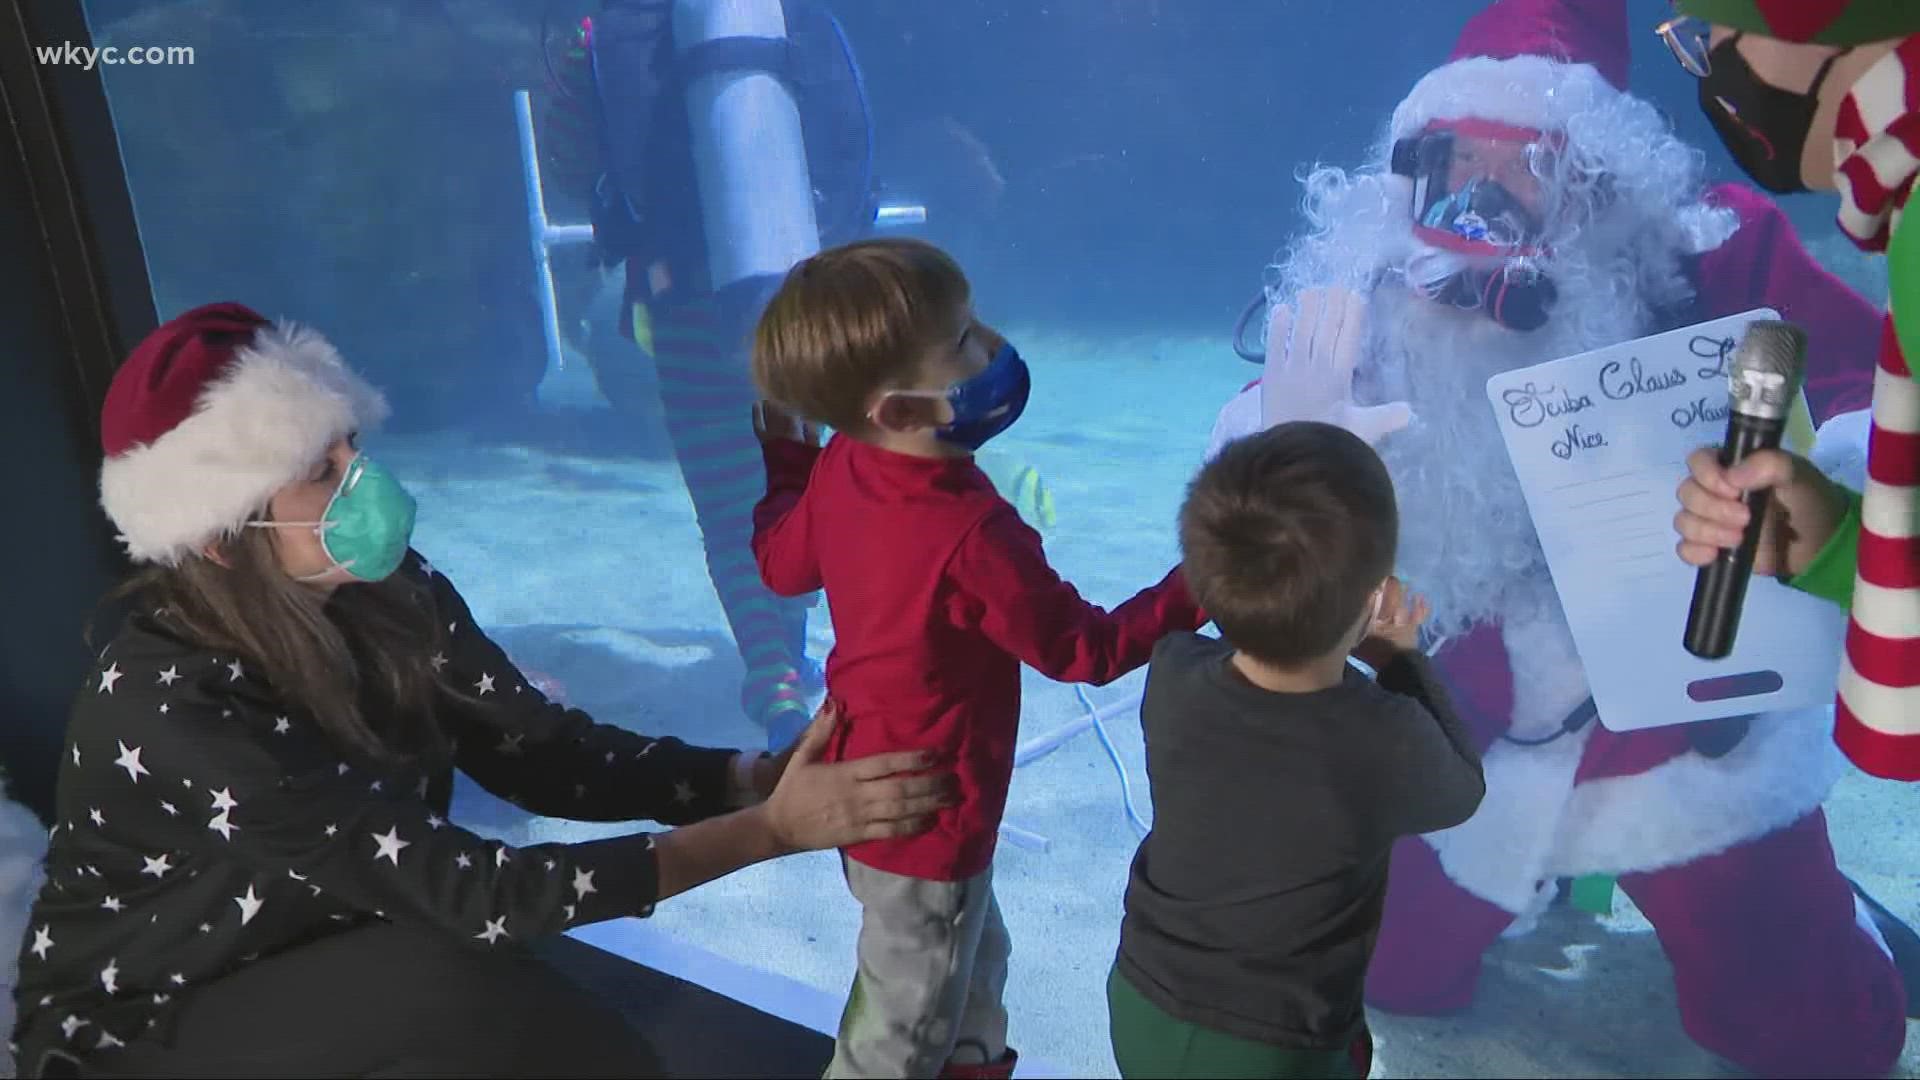 Who makes a list and checks it twice, wears a red suit, and swims with sharks? Scuba Claus! And he's back at the Cleveland Aquarium.